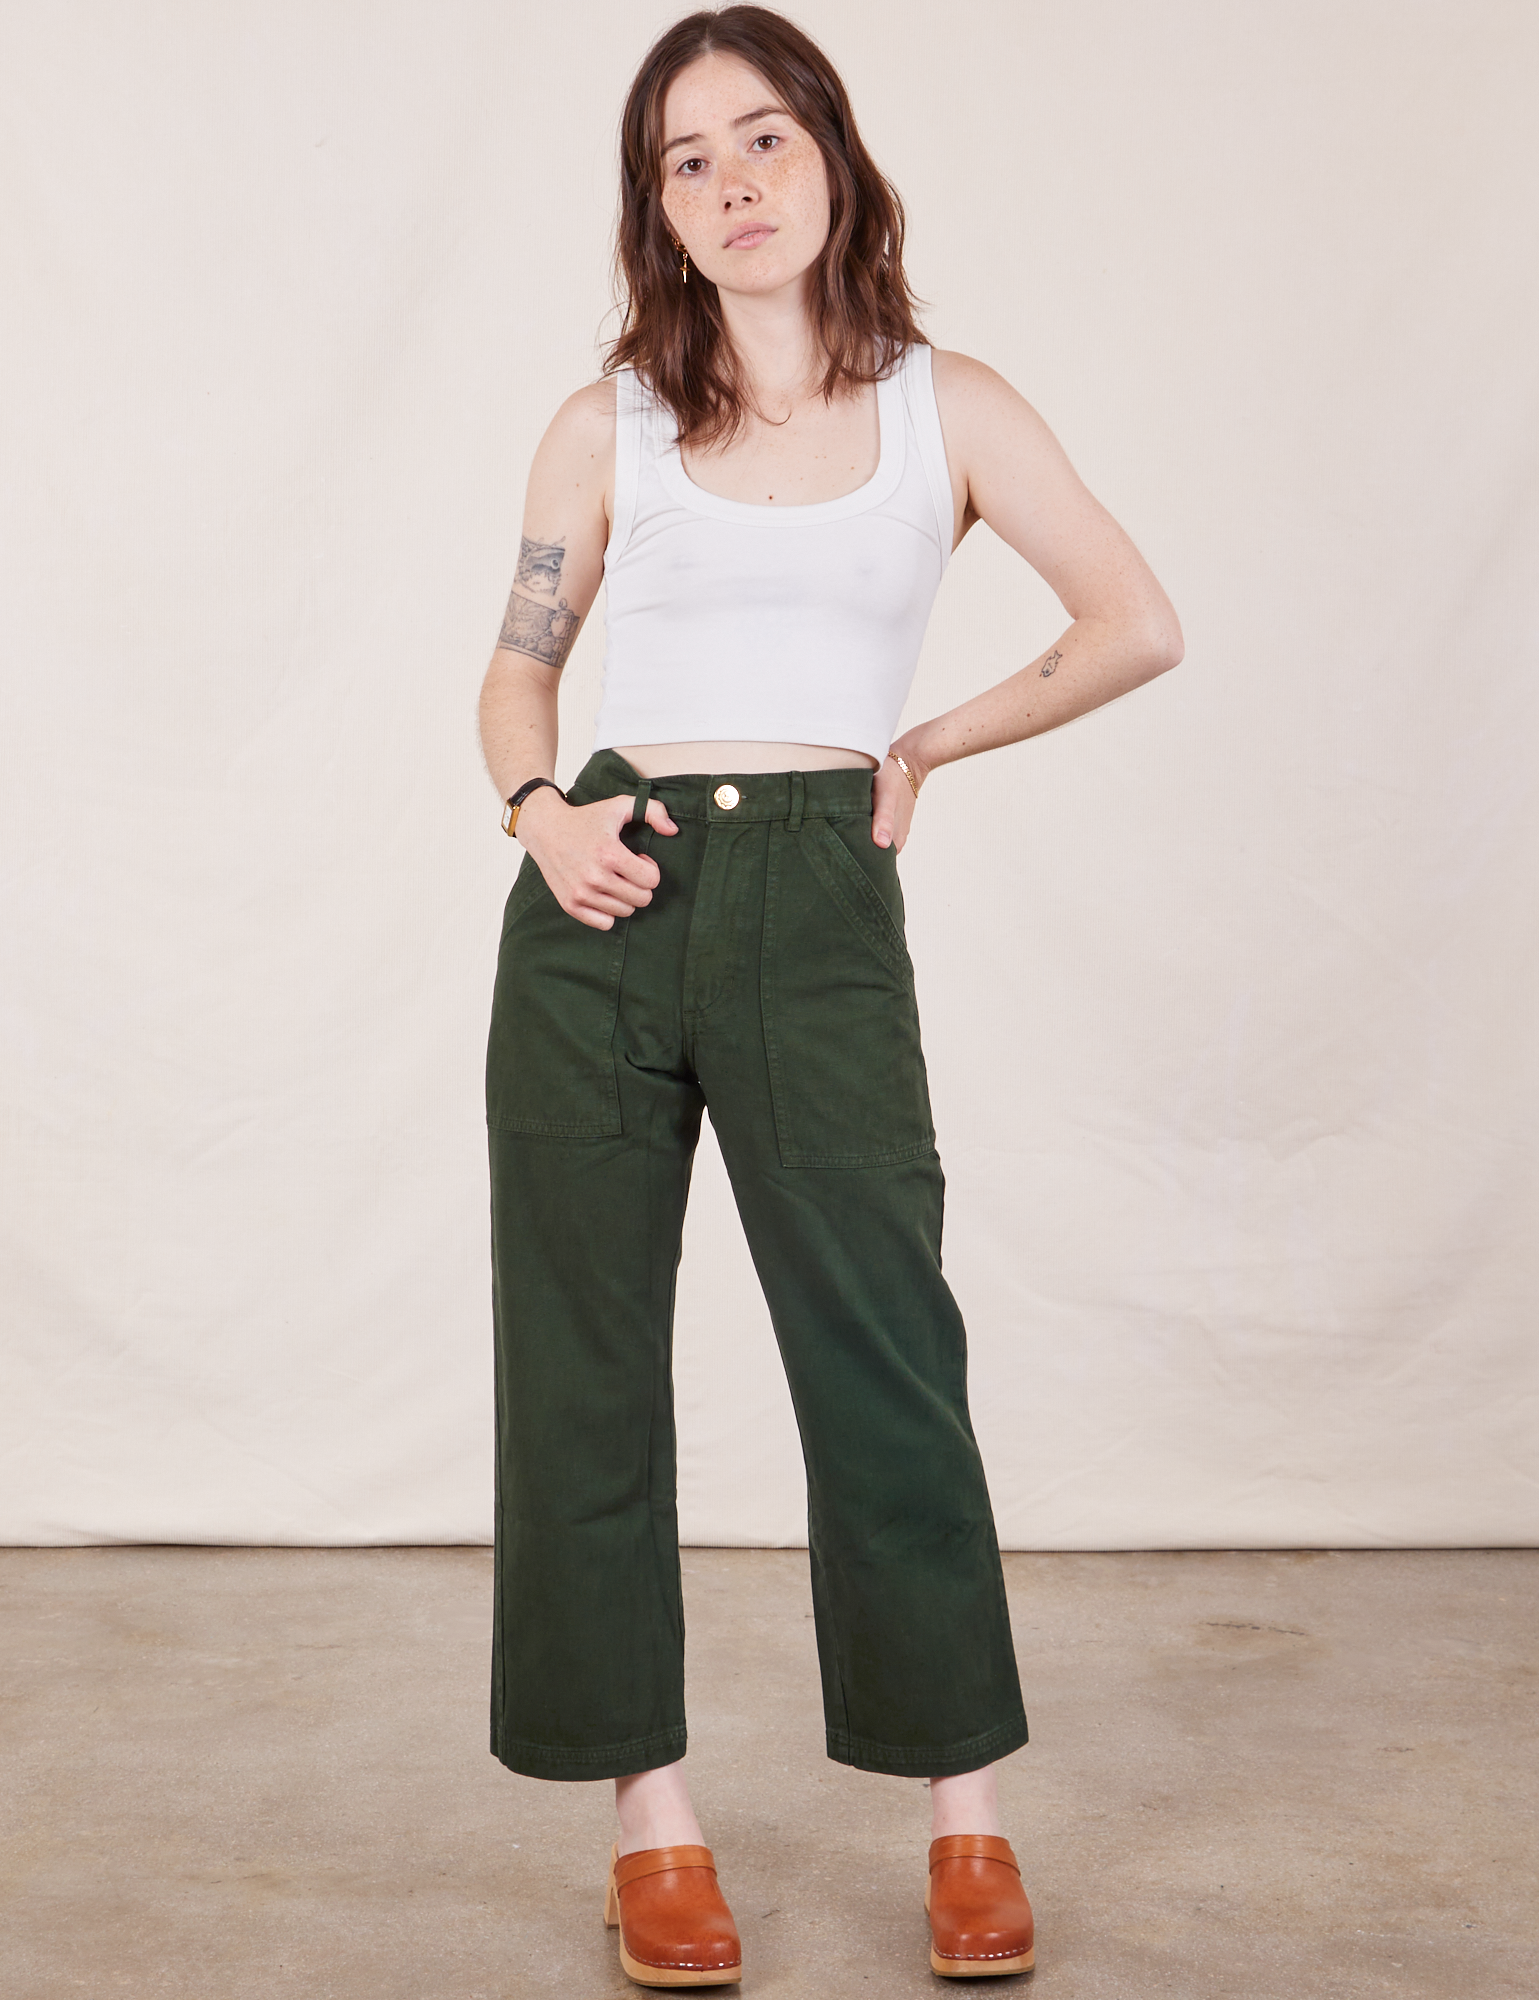 Hana is 5&#39;3&quot; and wearing XXS Petite Work Pants in Swamp Green paired with vintage tee off-white Cropped Tank Top